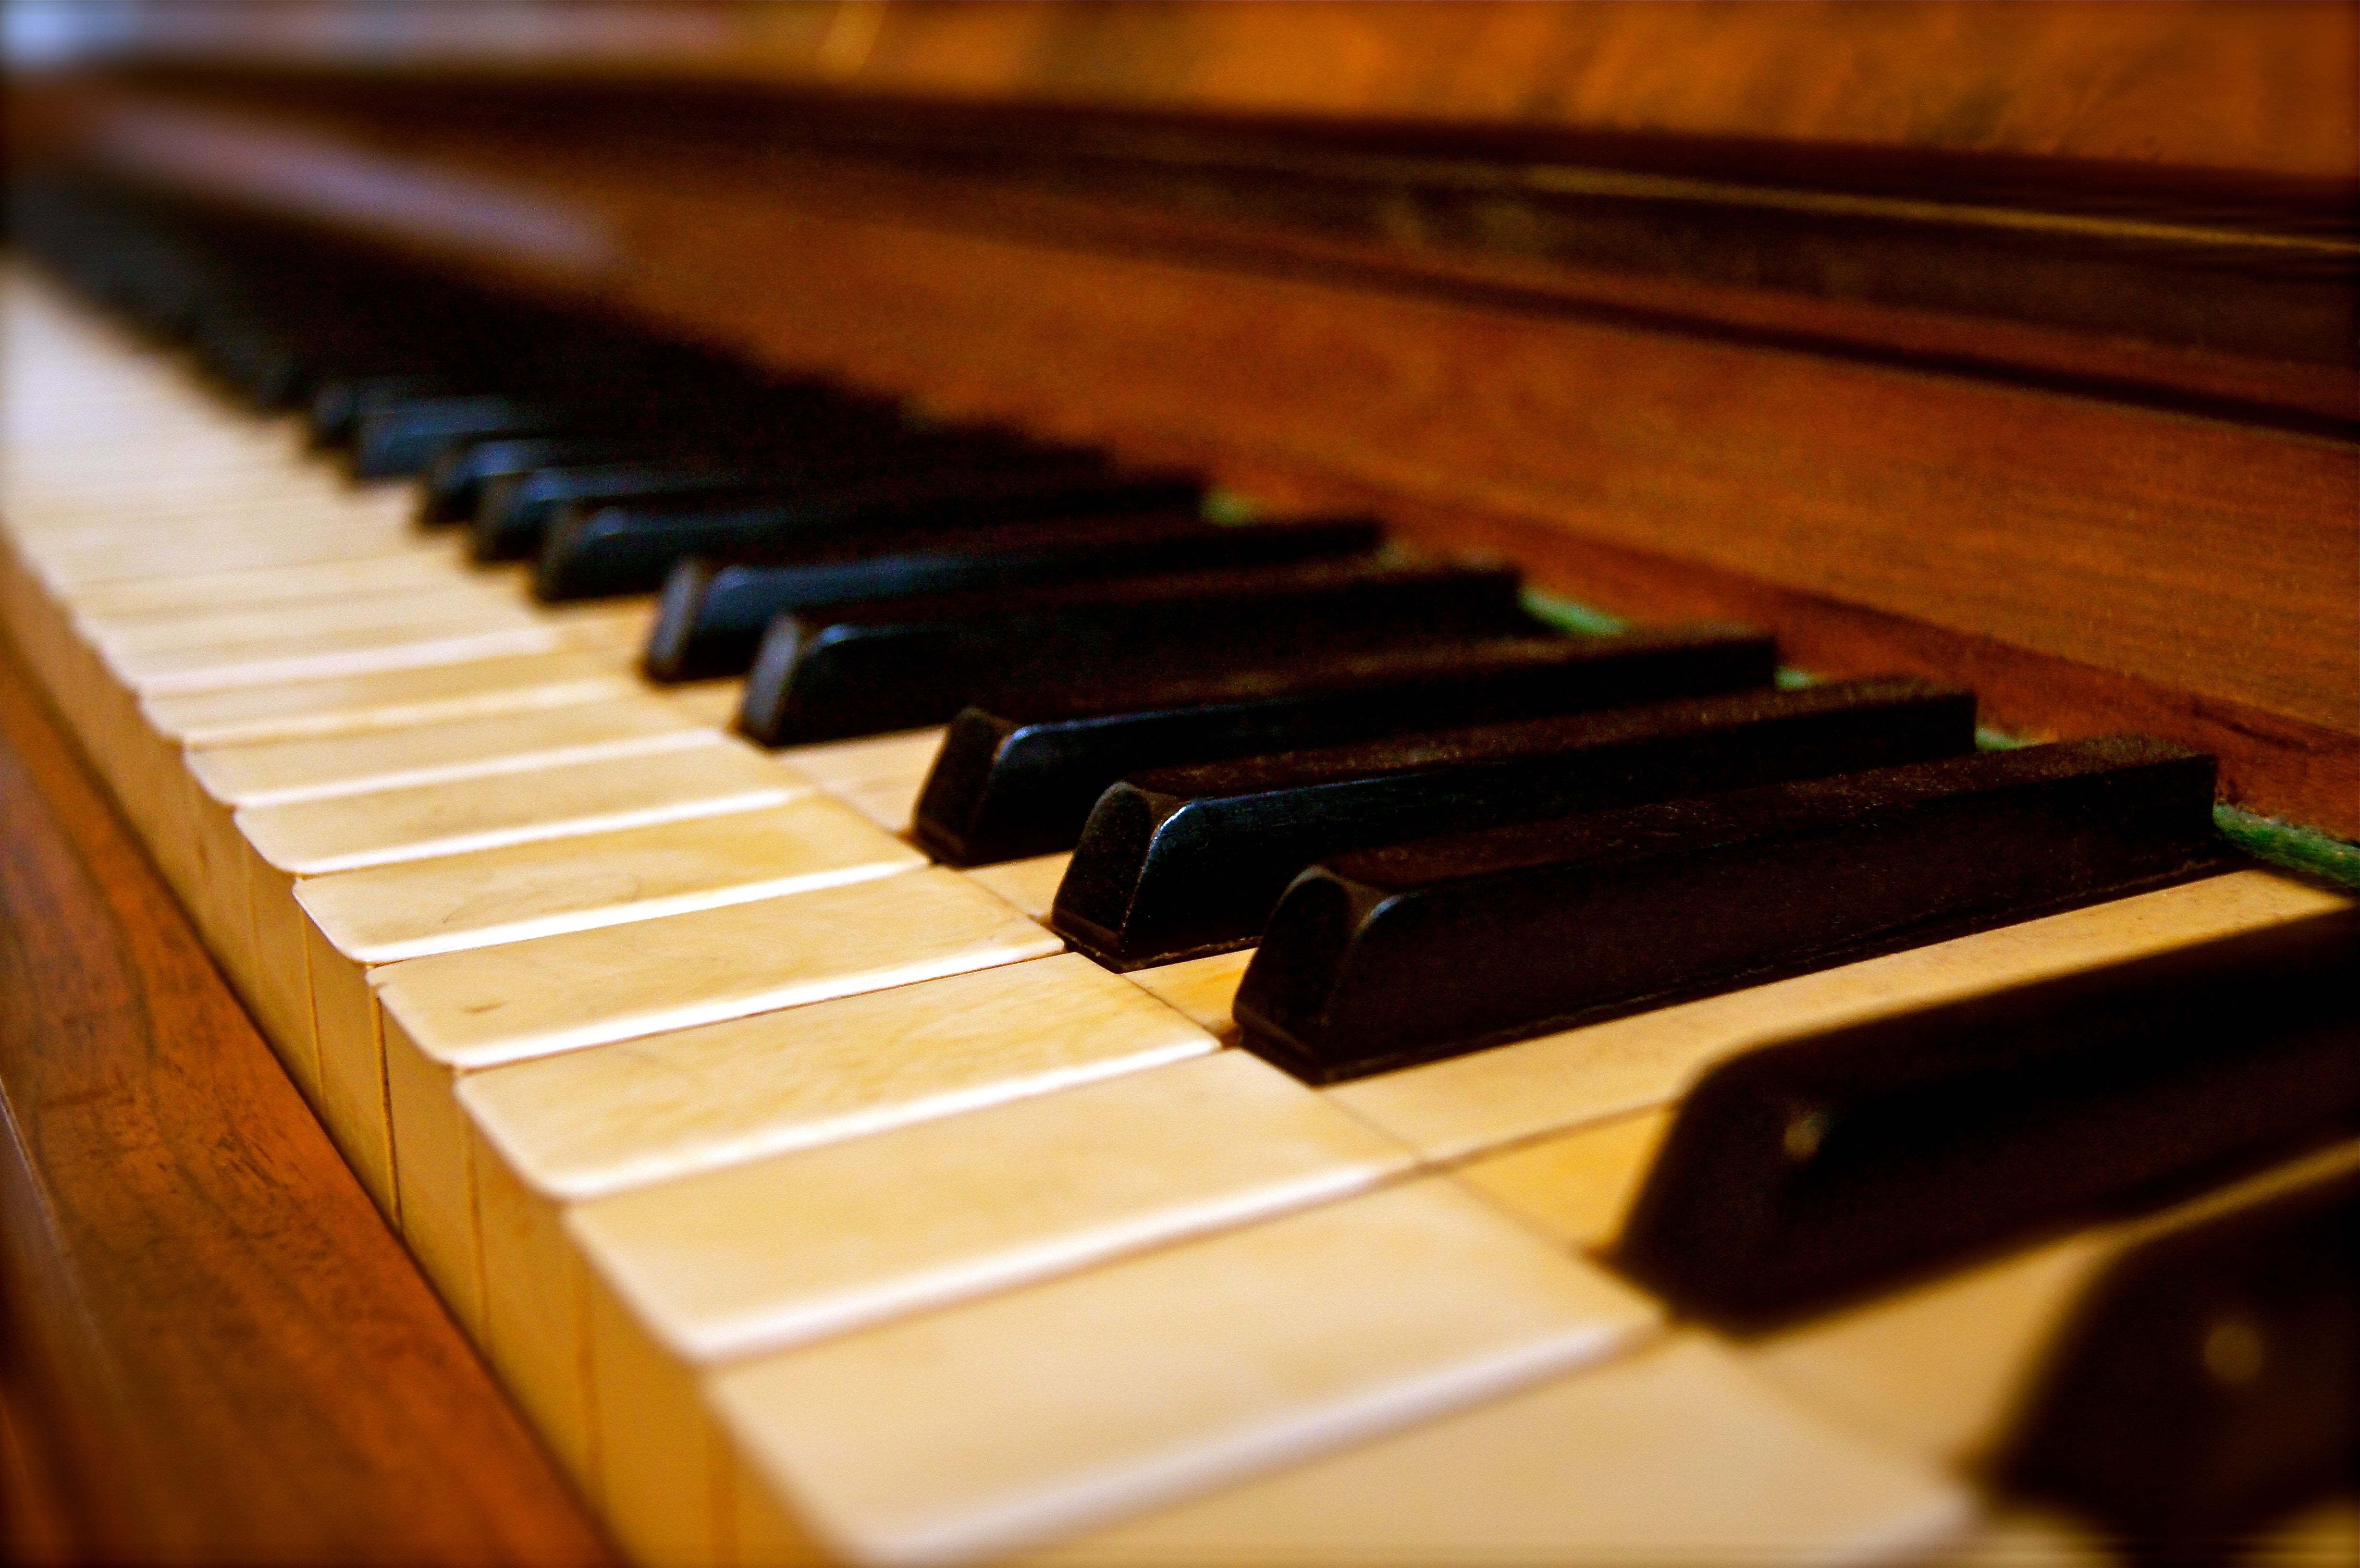 Historically, Piano, Old, Music, Keys, piano, musical instrument